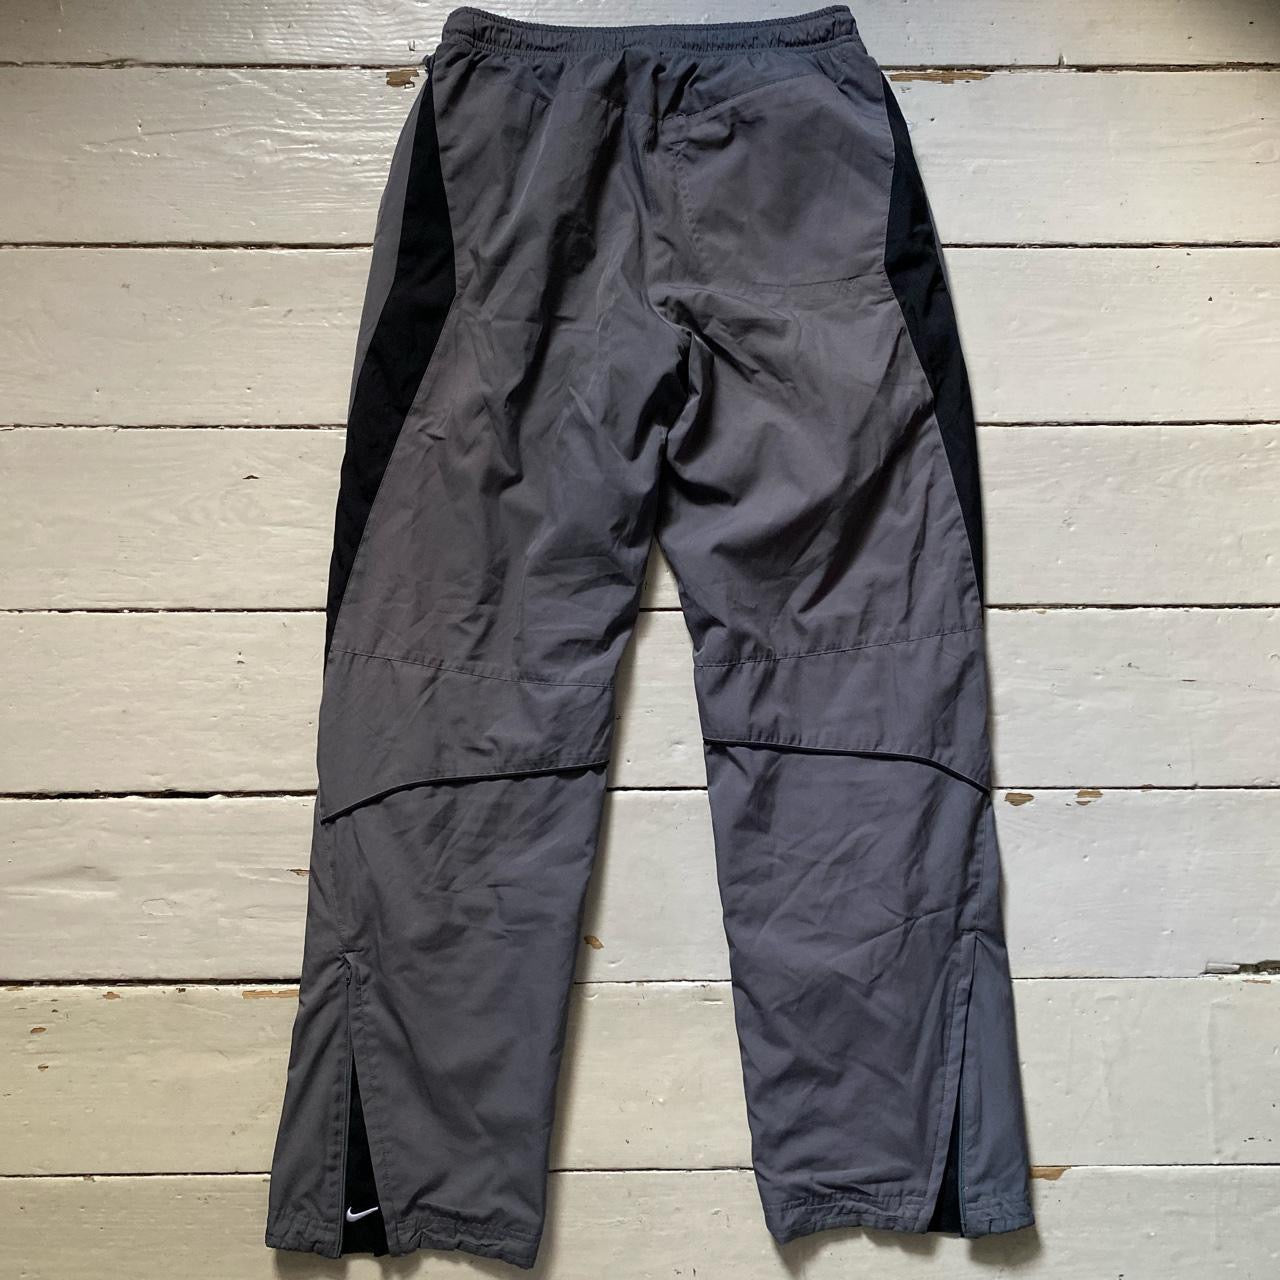 Nike Vintage Shell Bottoms (Small)